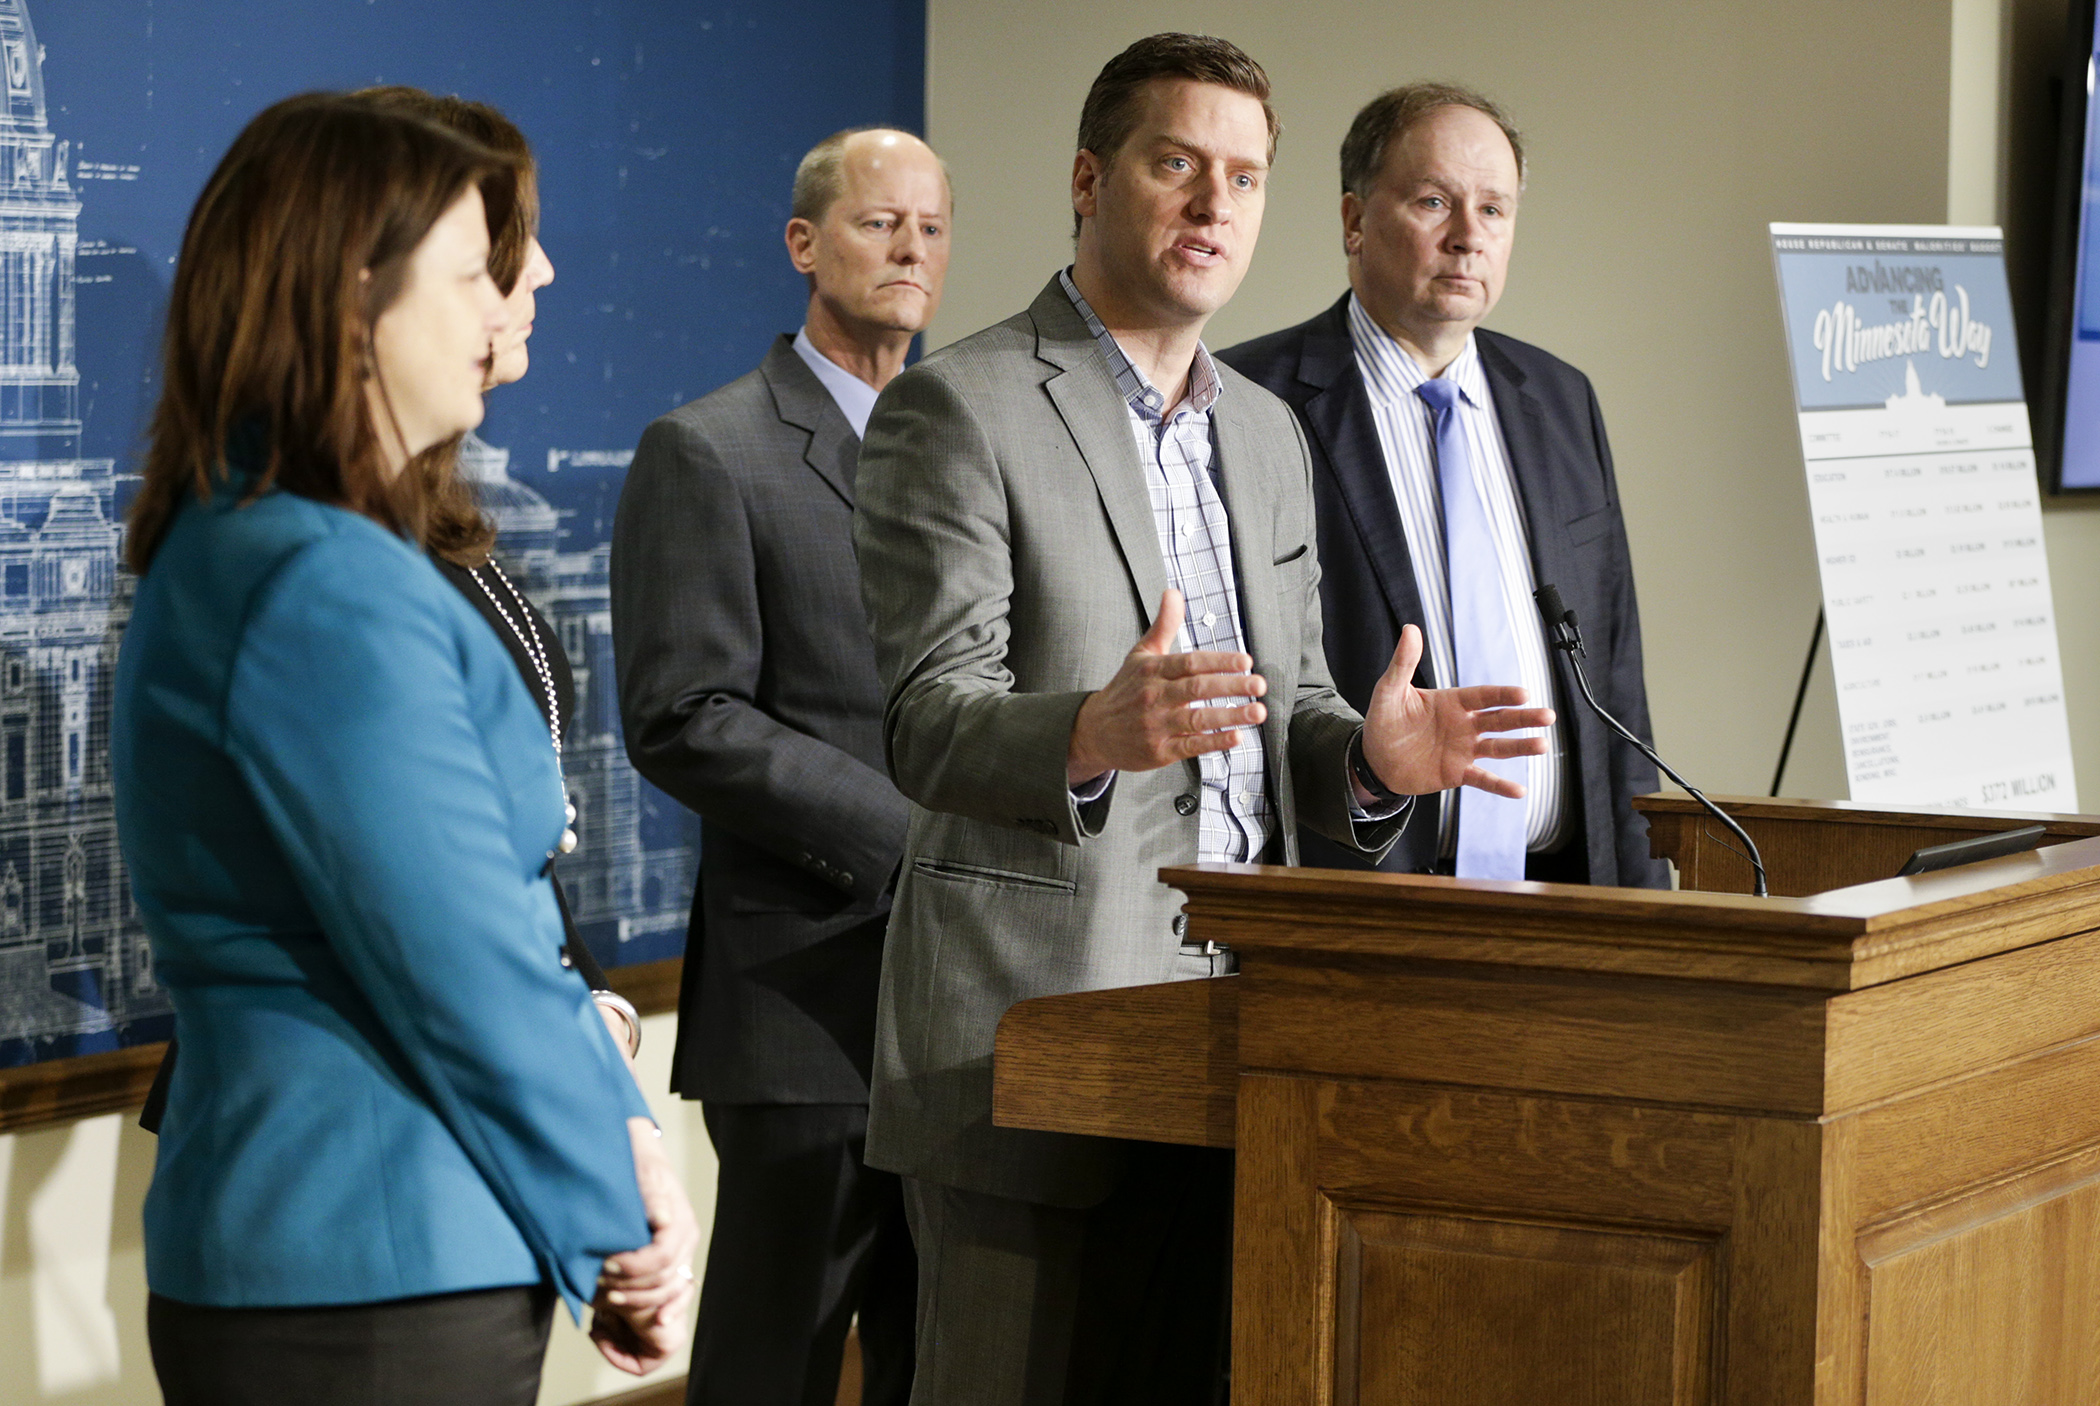 House Speaker Kurt Daudt discusses details of the House/Senate joint budget targets during an April 28 news conference. Also pictured are, from left, House Majority Leader Joyce Peppin, Sen. Julie Rosen, Senate Majority Leader Paul Gazelka and Rep. Jim Knoblach. Photo by Paul Battaglia